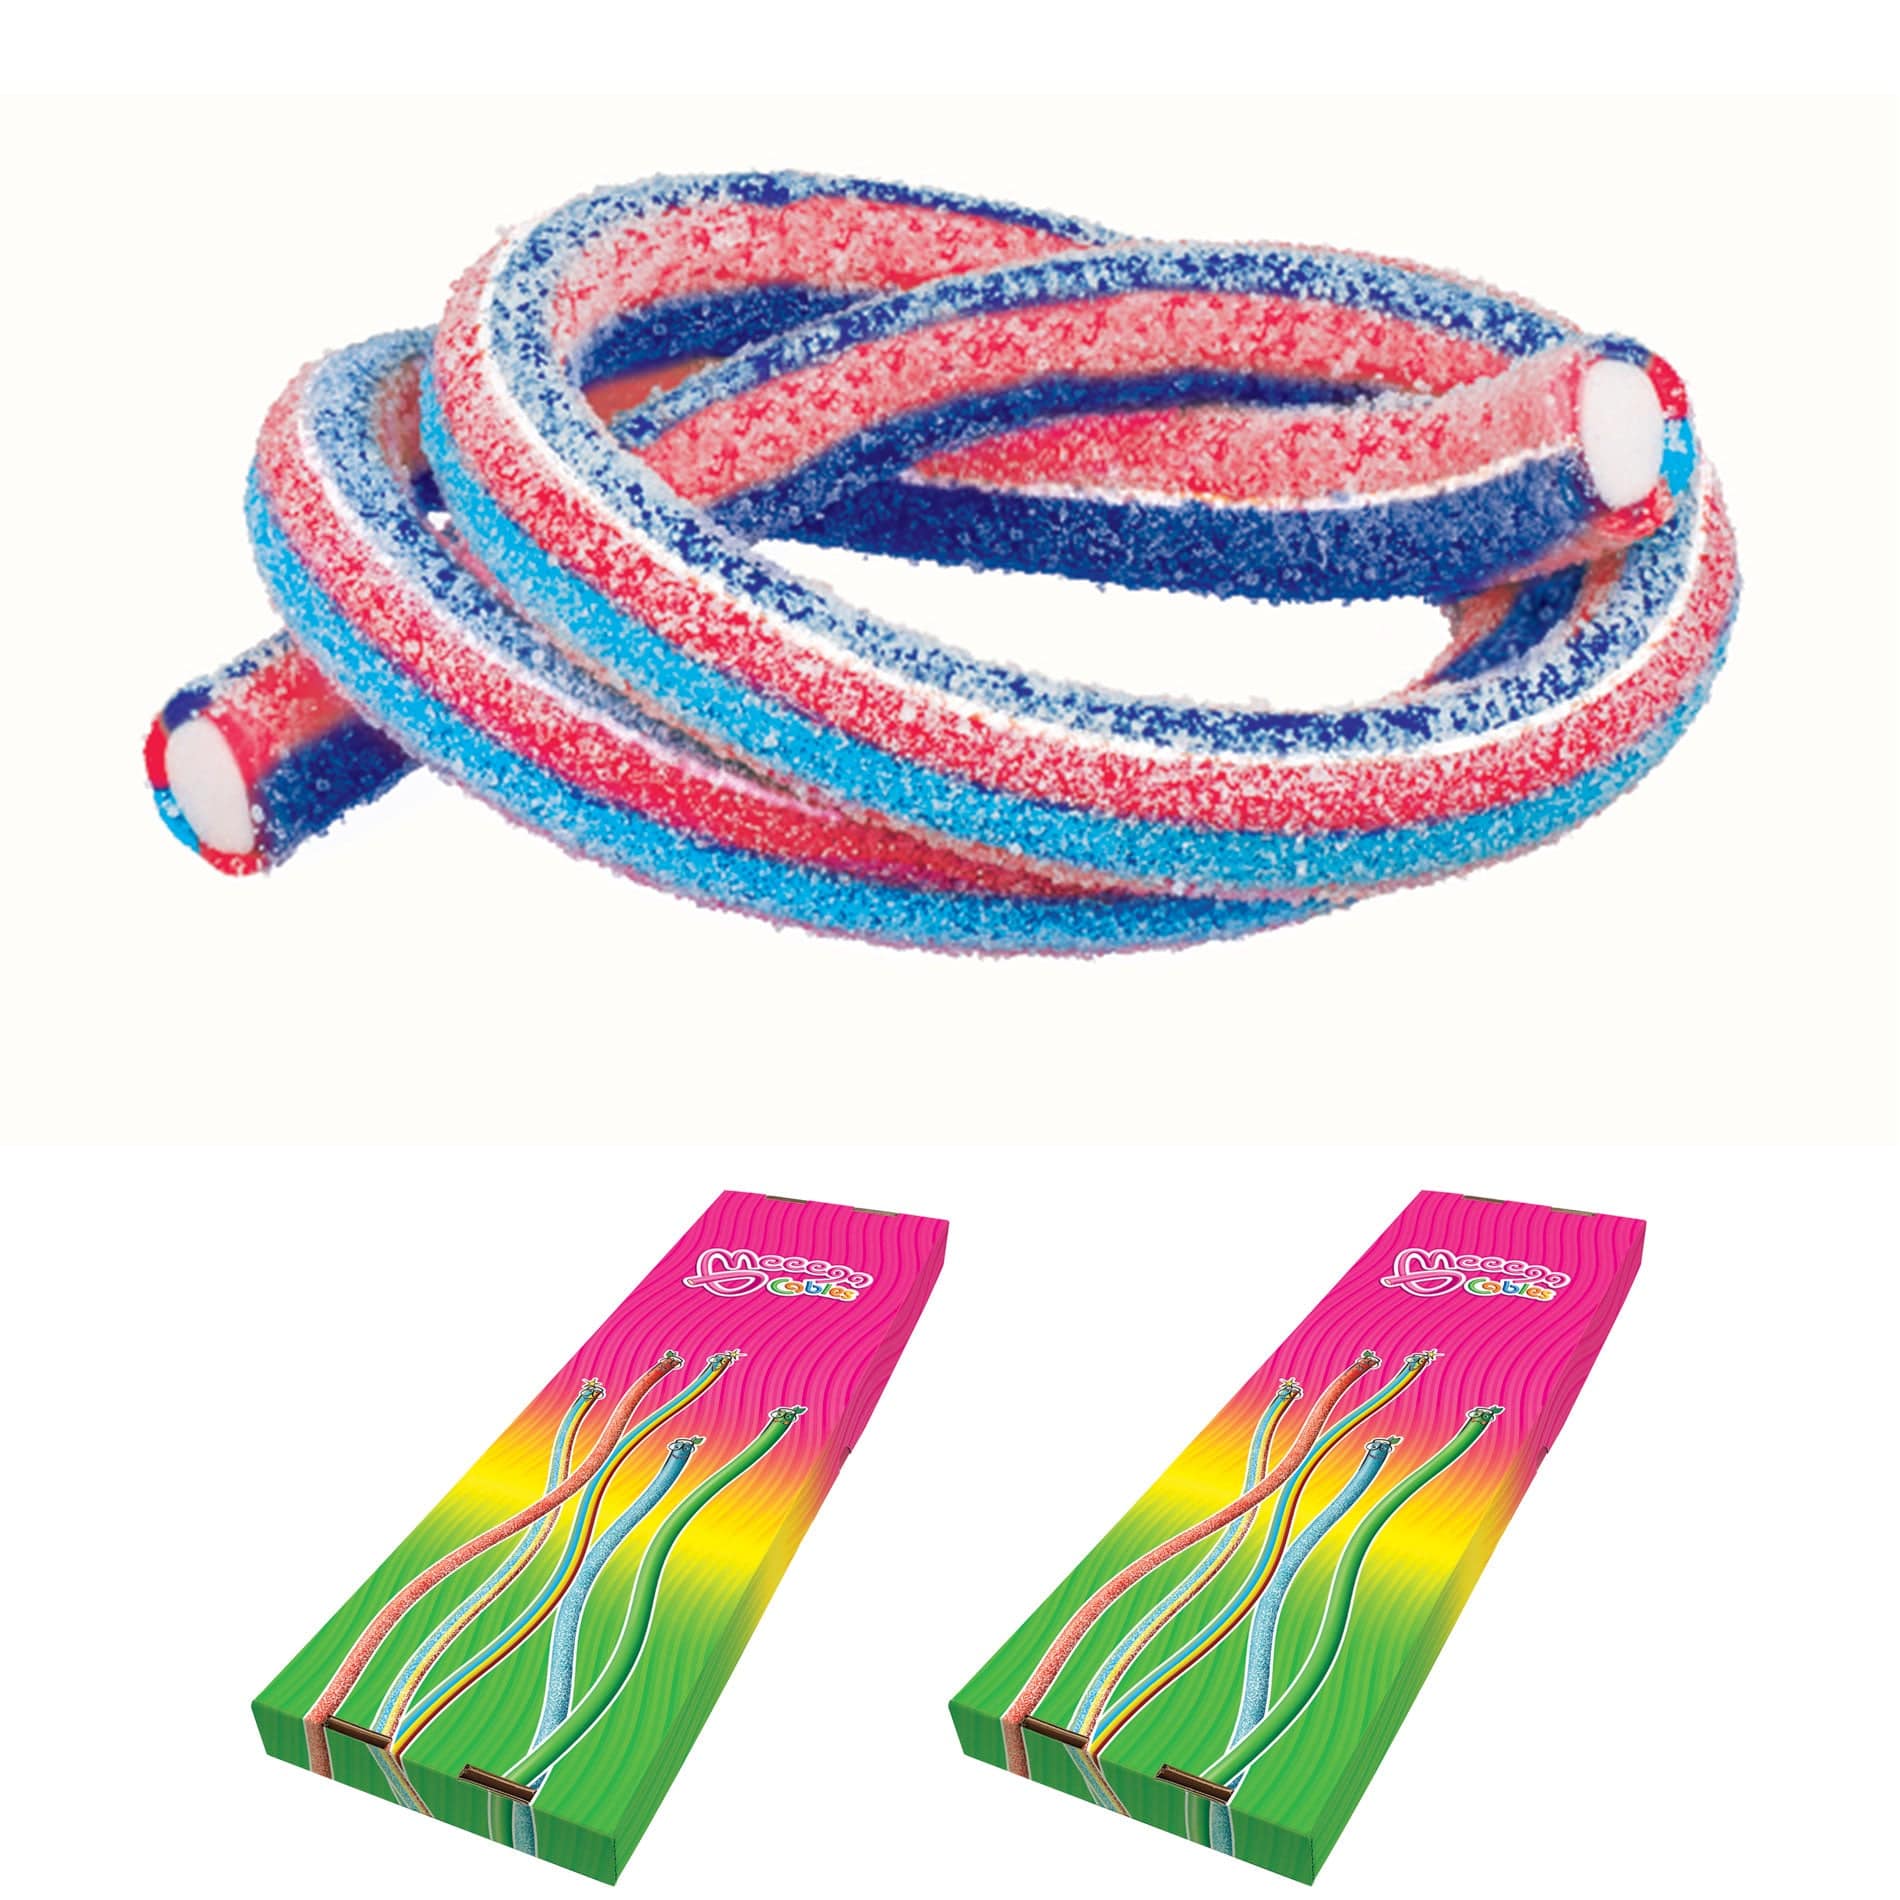 Novelty Concessions Gummy Rope FIZZY BERRY / 2 Pack (60 pieces) Meeega Cables European Chewy Rope Candy - Box of 30 individually wrapped Meeega Cables, each over 2-feet long cups with lids and straws